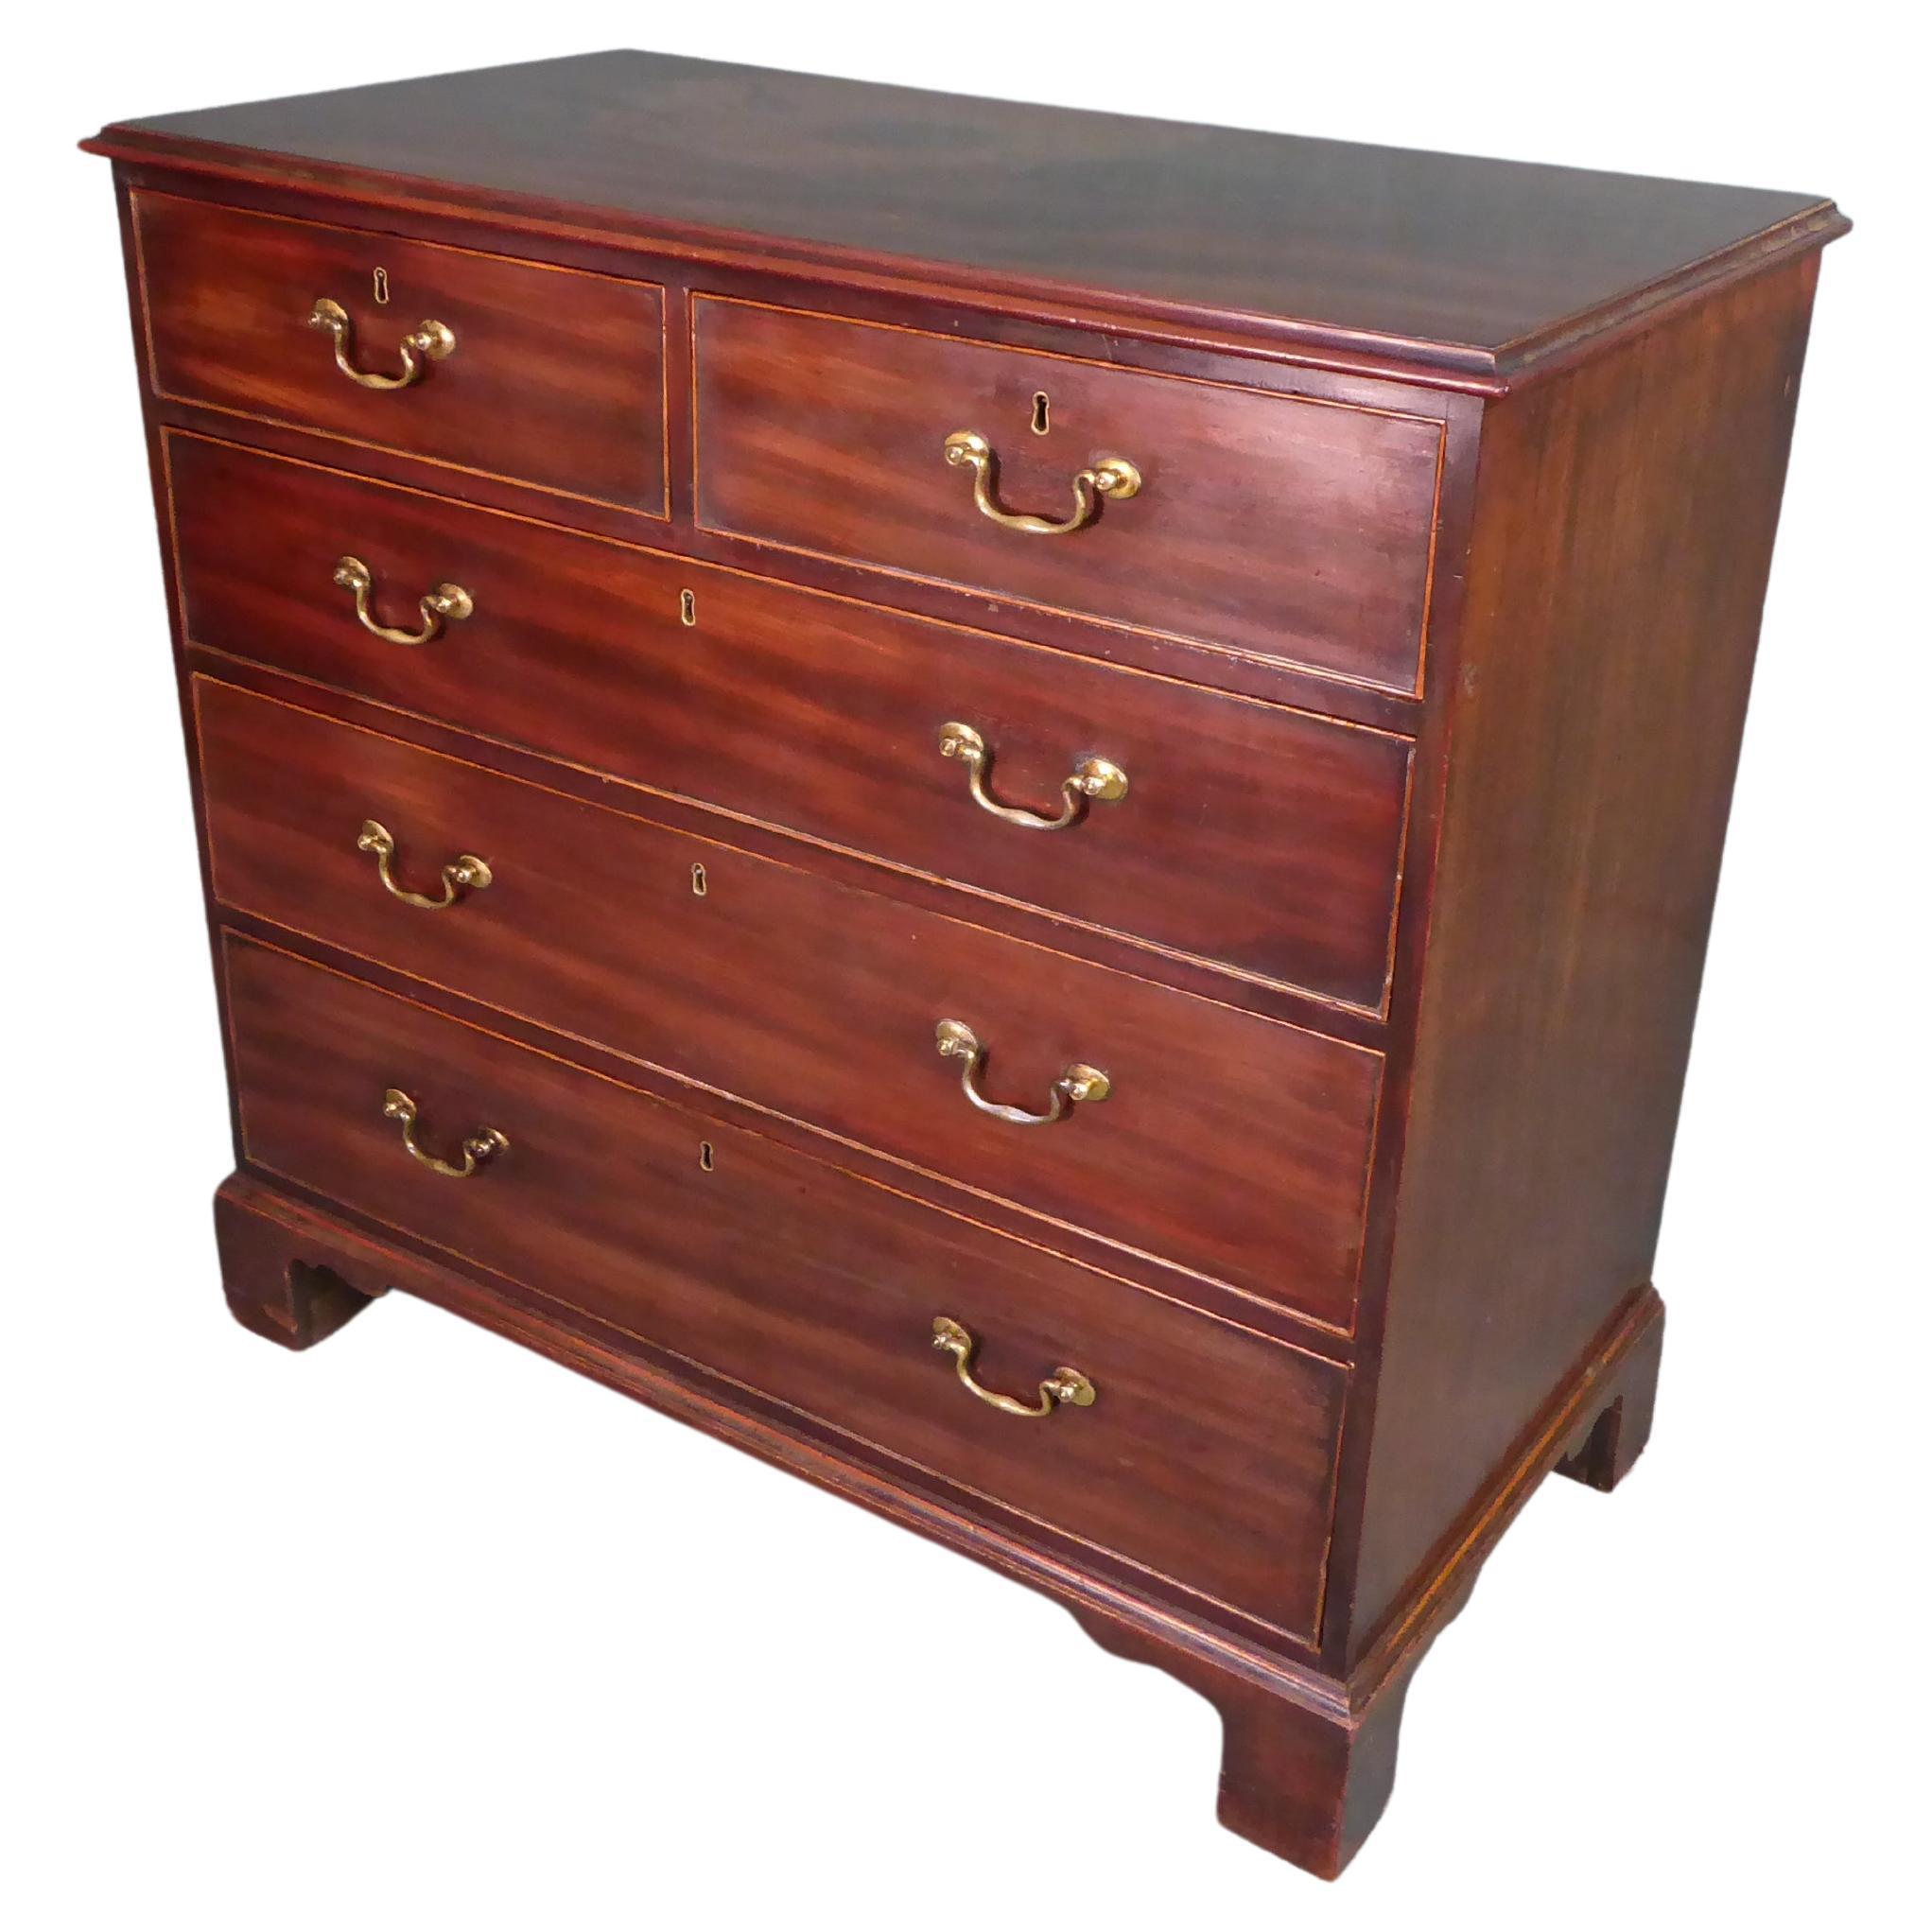 Antique Georgian mahogany scotttish chest of drawers with secret drawers within.